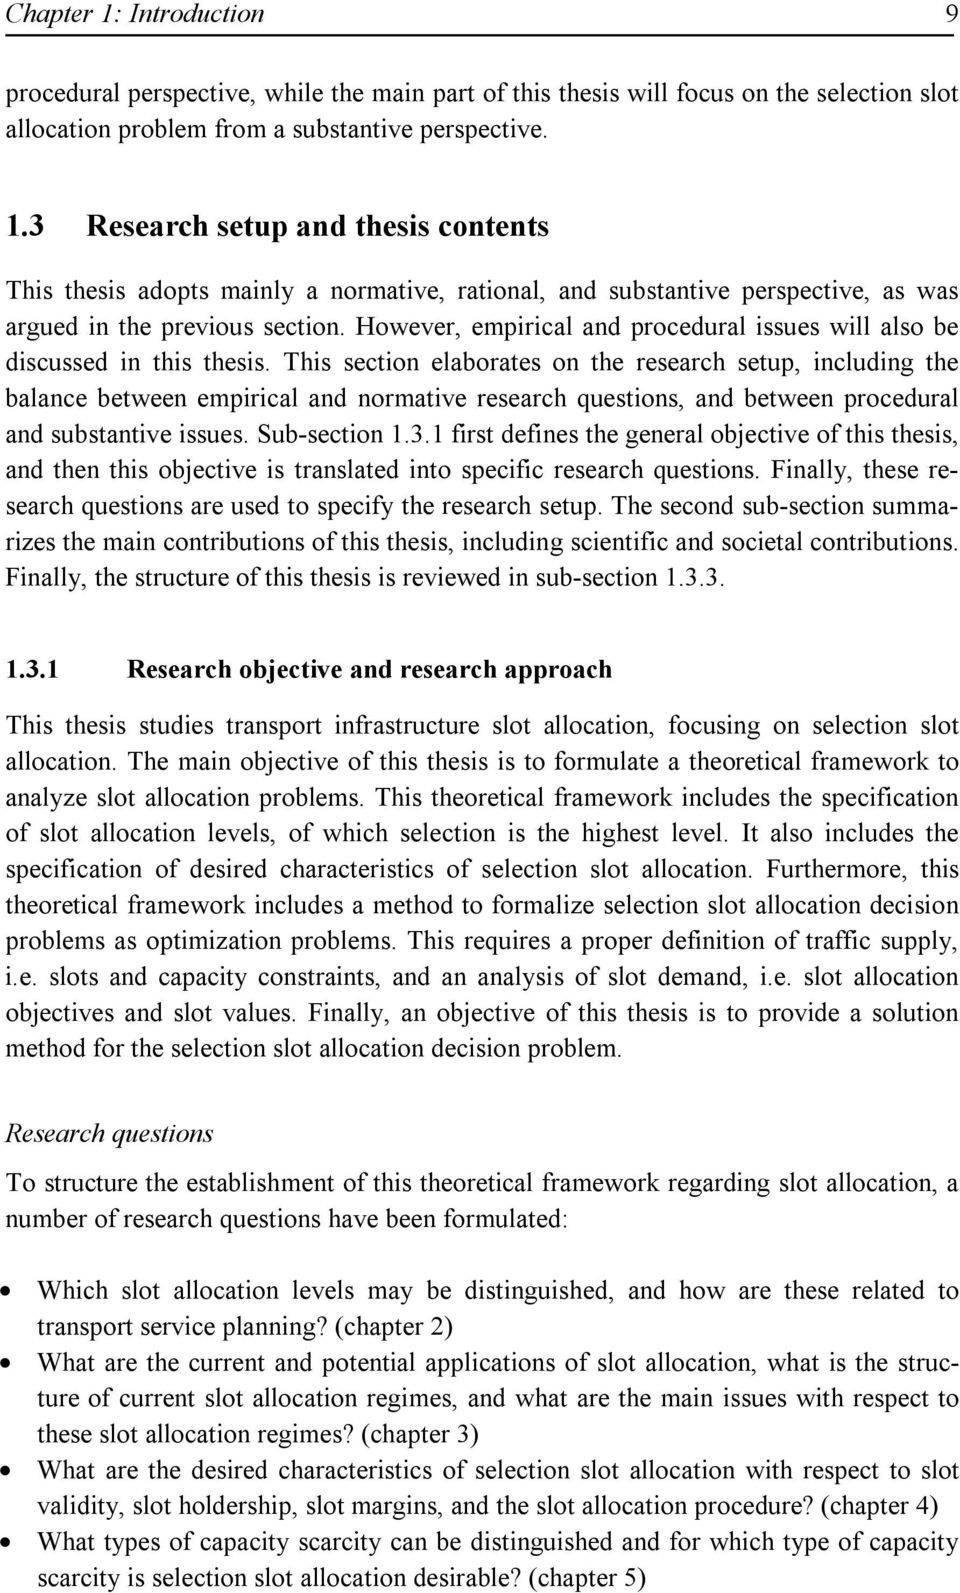 This section elaborates on the research setup, including the balance between empirical and normative research questions, and between procedural and substantive issues. Sub-section 1.3.